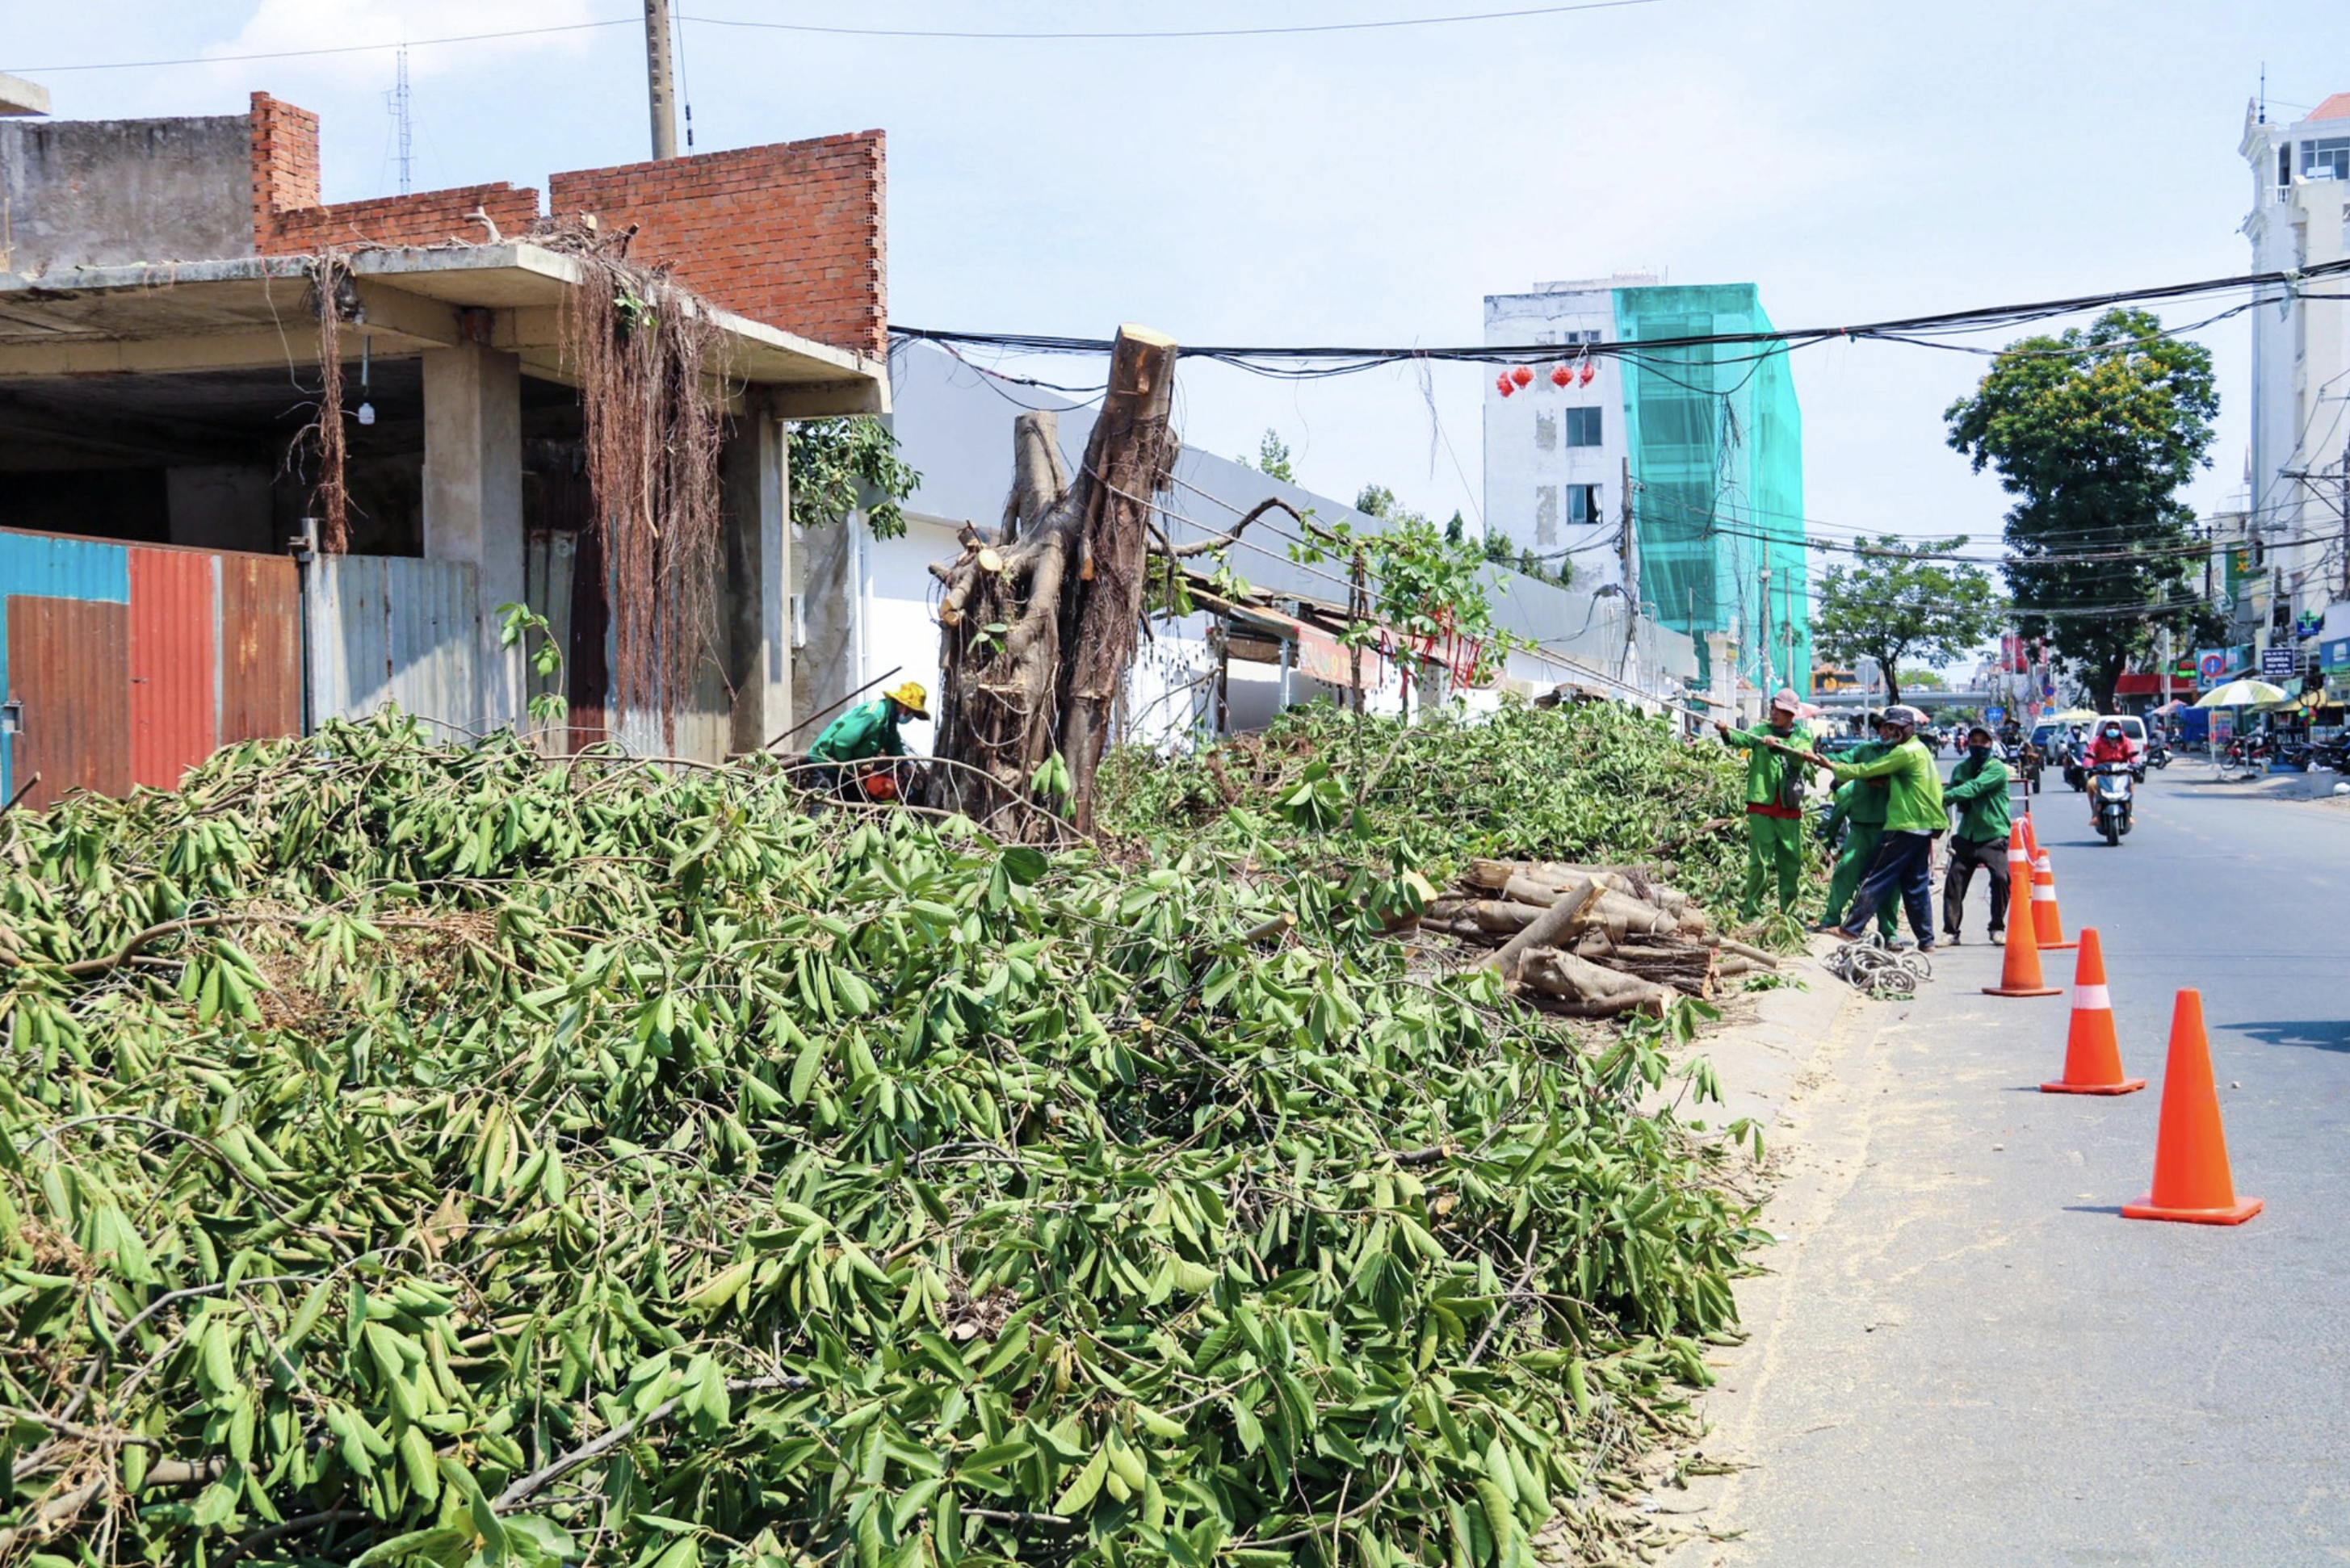 Ho Chi Minh City fells, relocates some 100 trees for road expansion near Tan Son Nhat airport